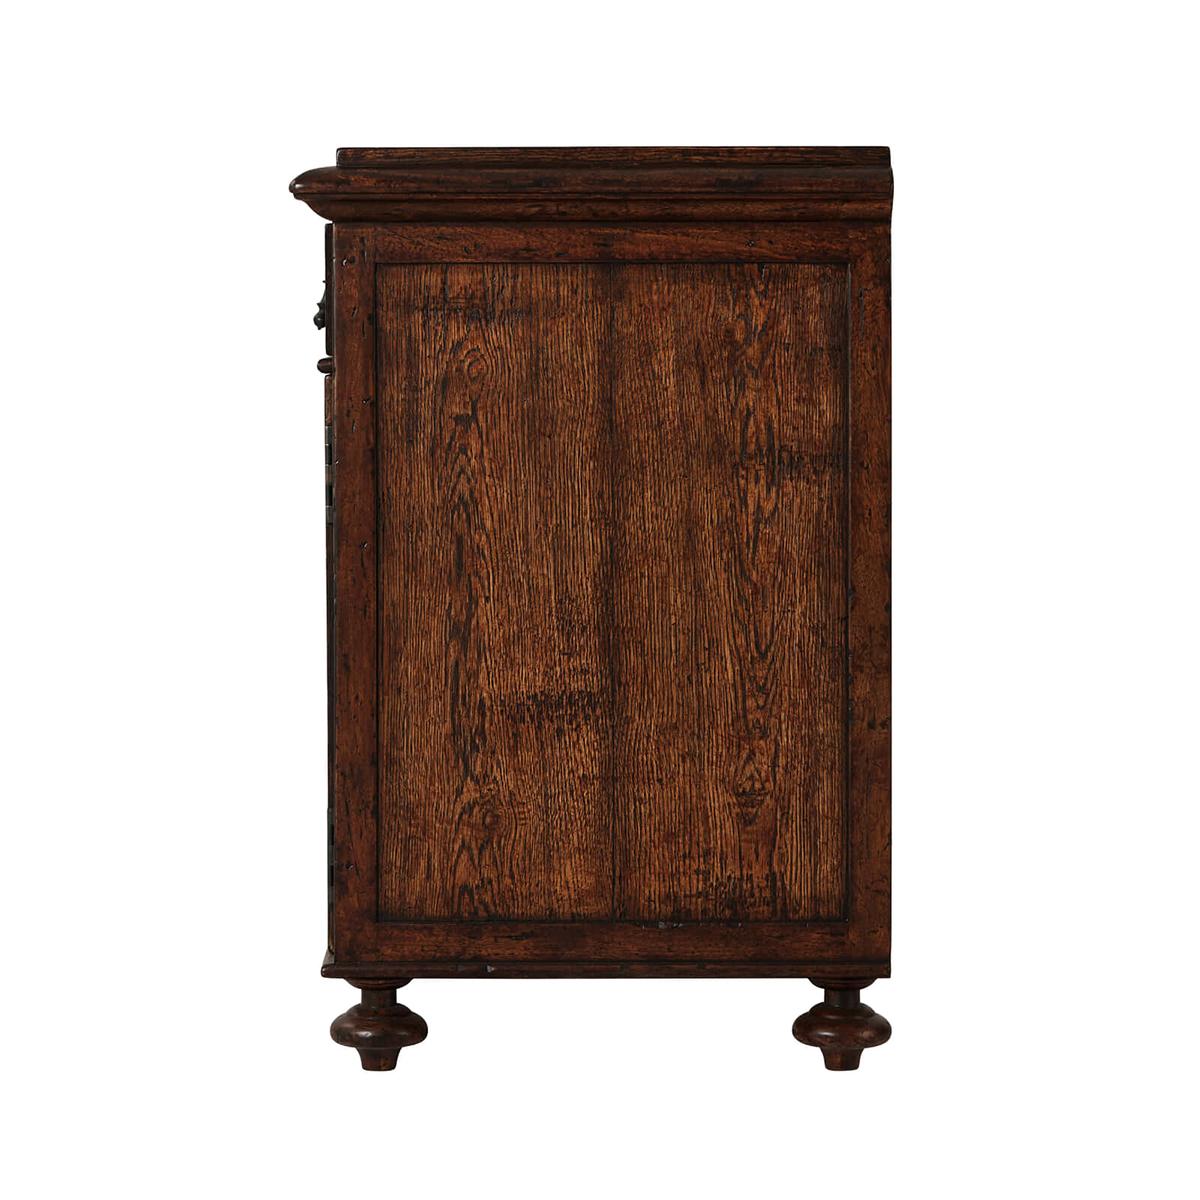 Contemporary Country Rustic Oak Bedside Table For Sale